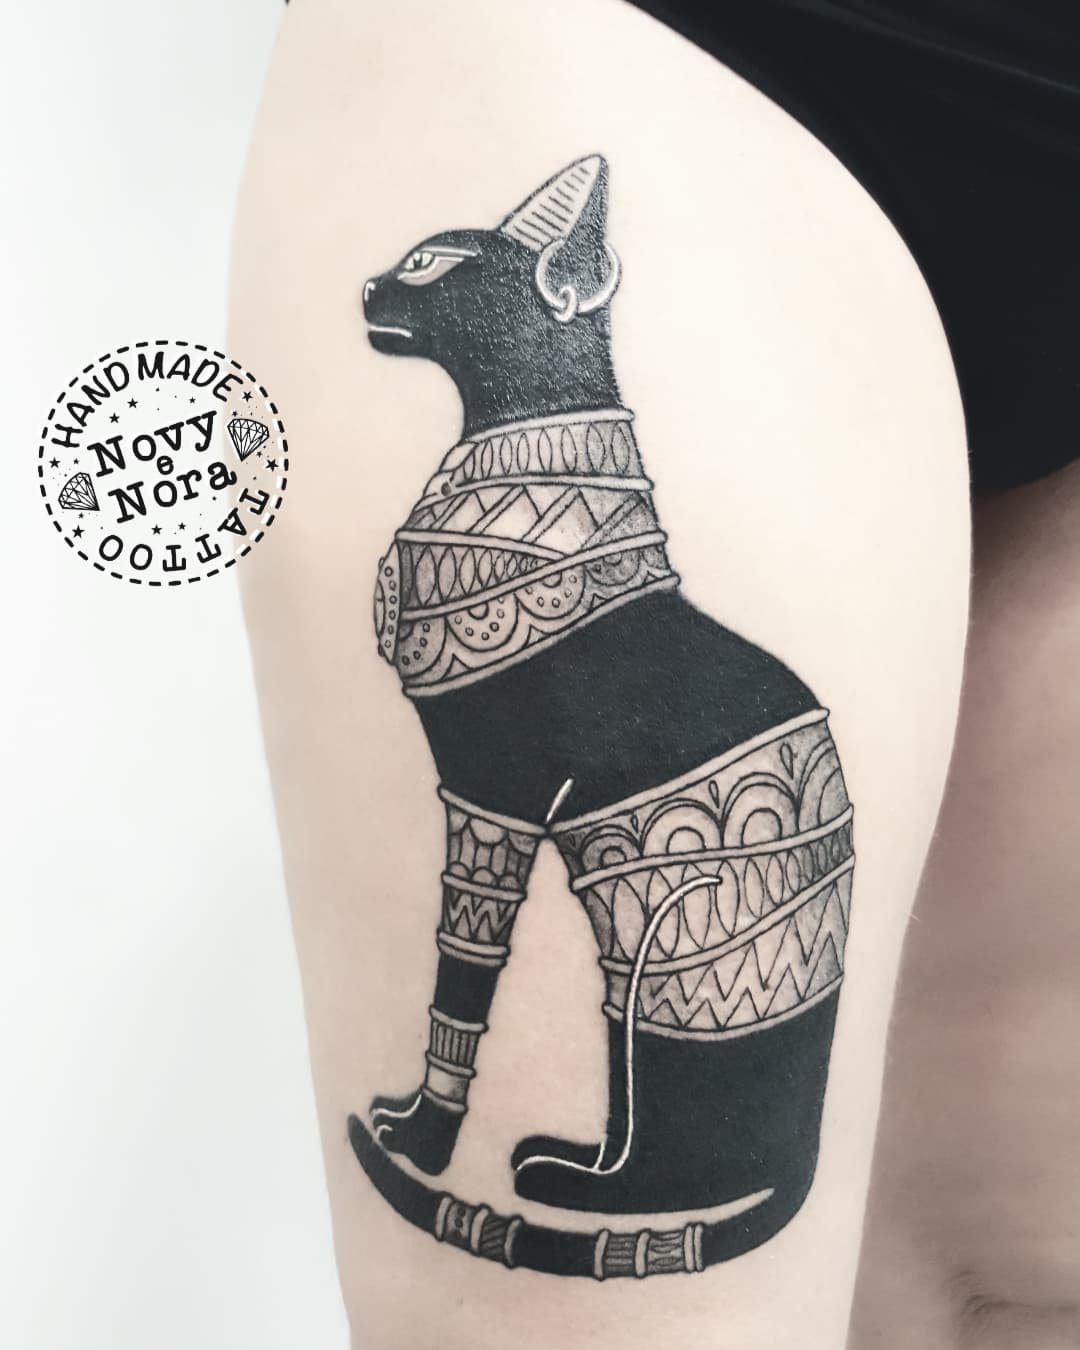 51 Awesome Egyptian Tattoo Ideas For Men and Women